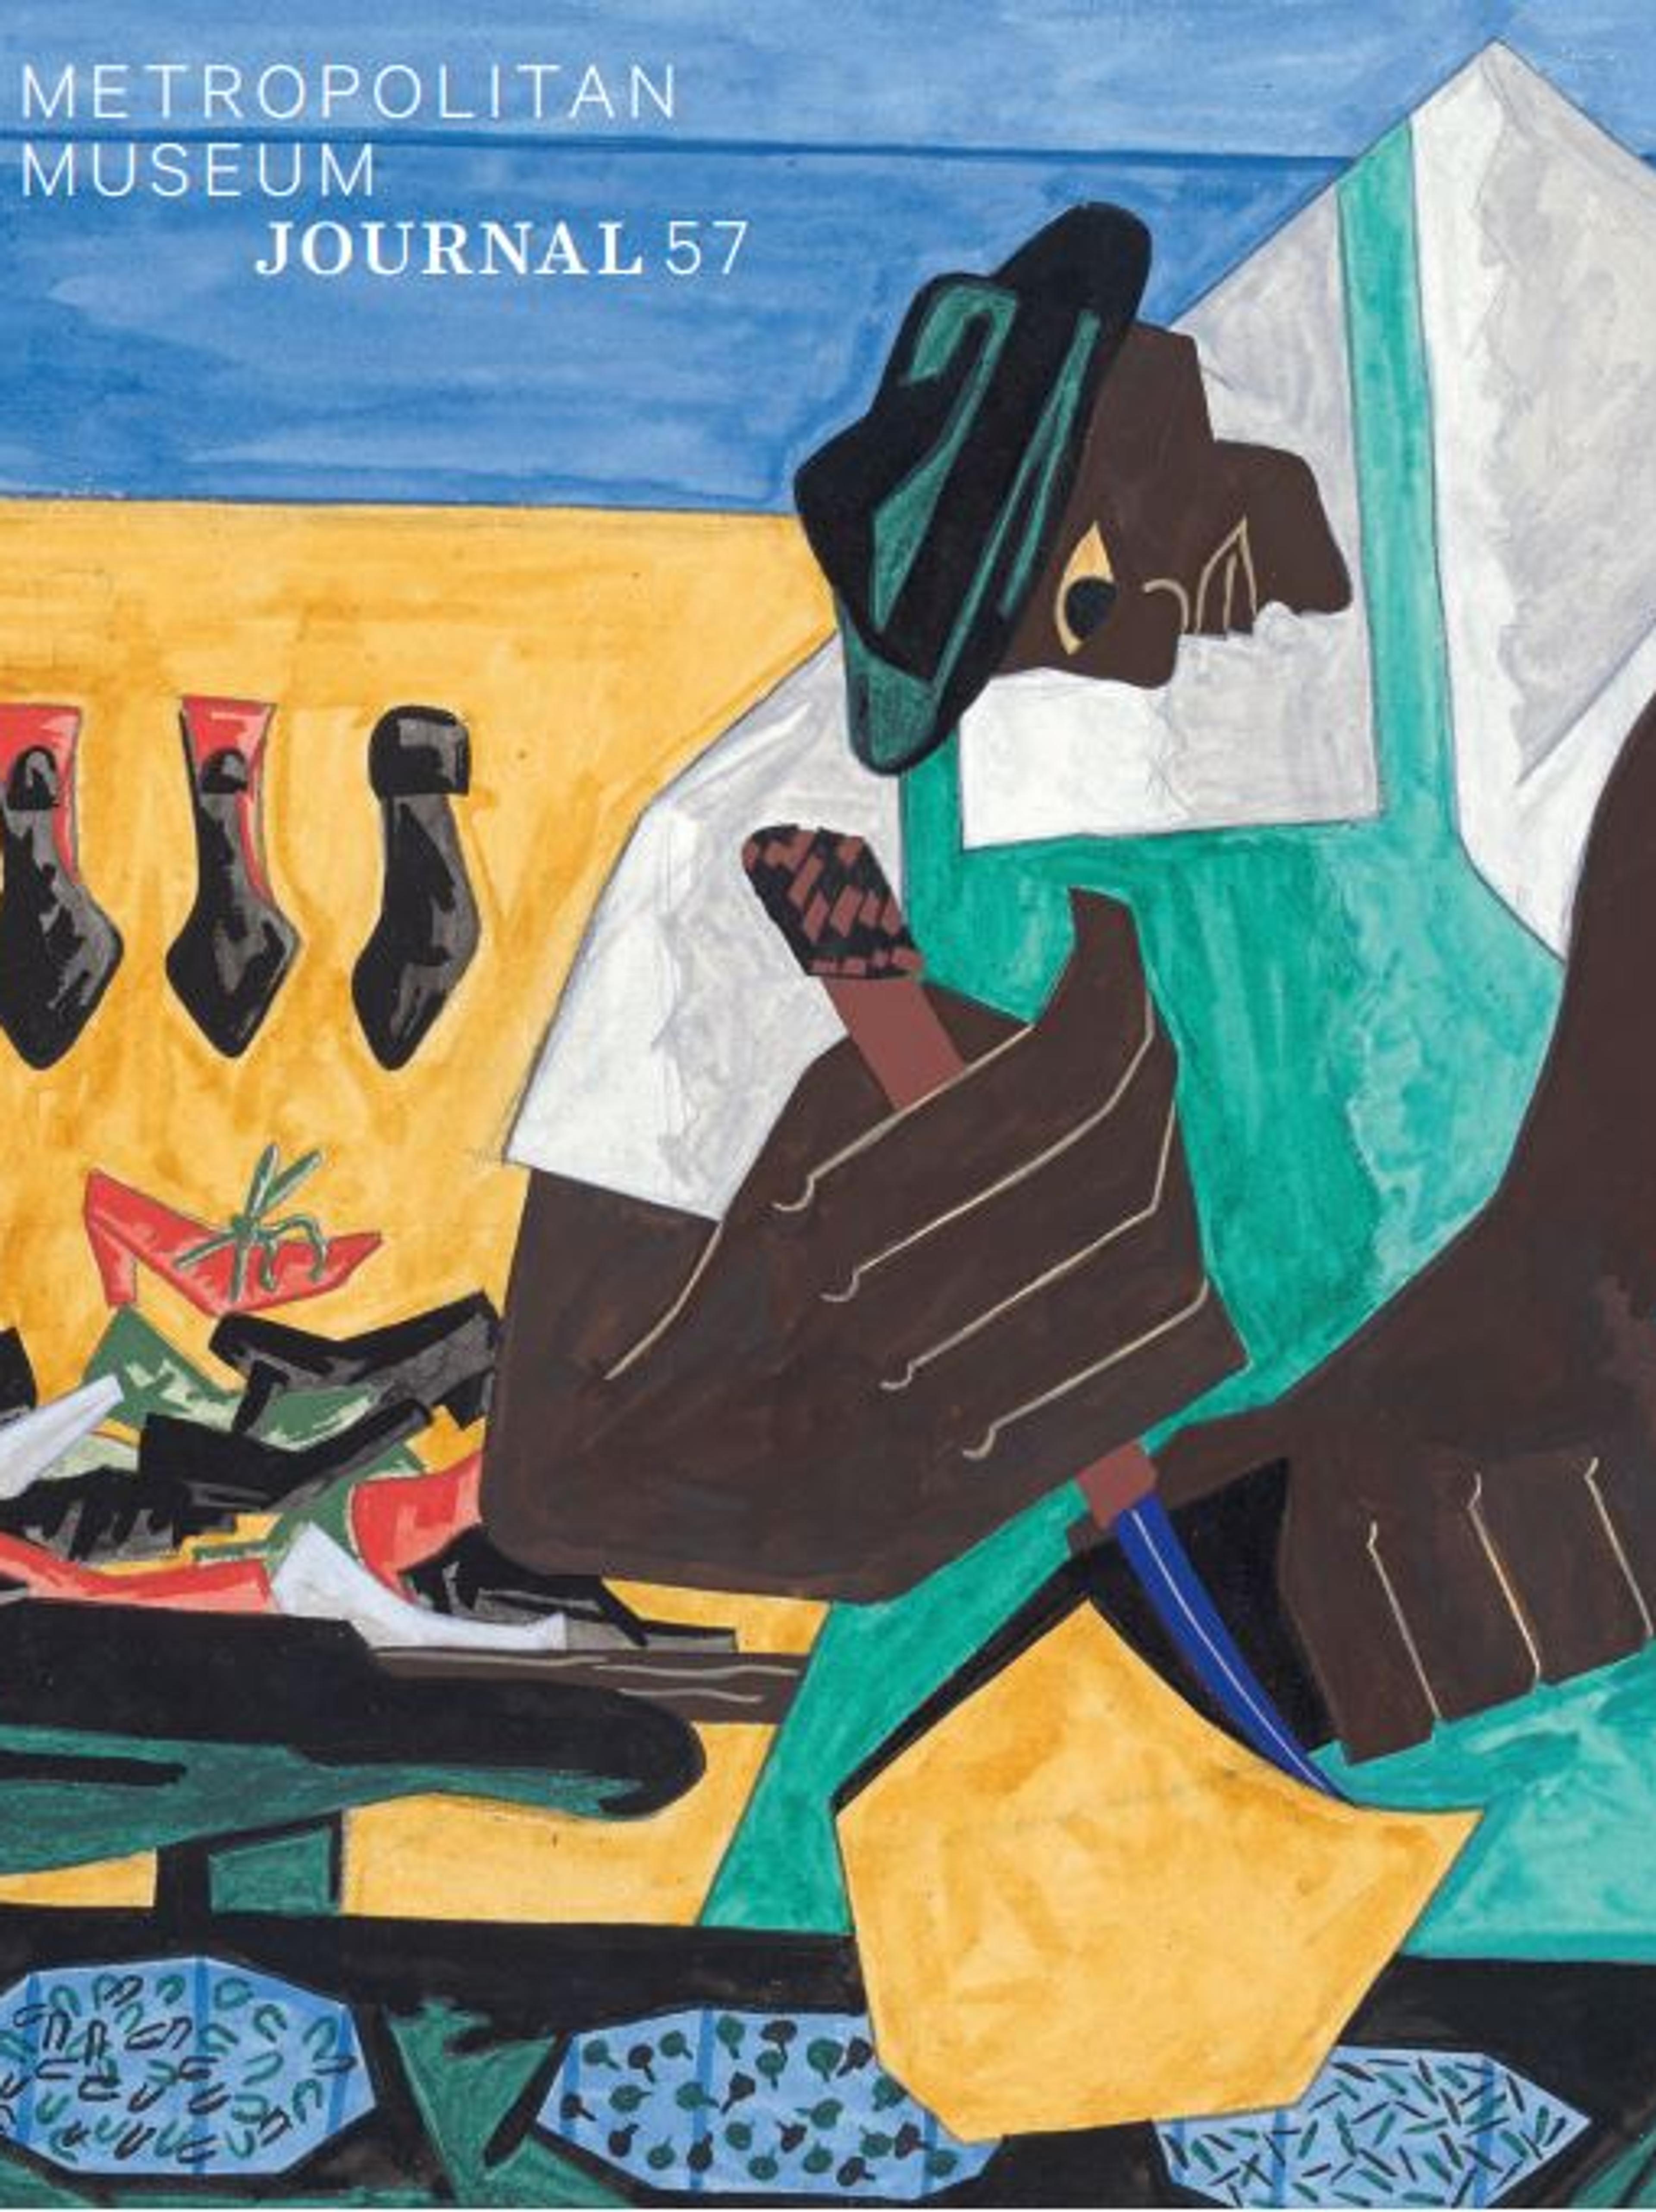 A journal cover featuring an abstracted representation of a Black shoemaker, carefully looking over his work process by Jacob Lawrence.